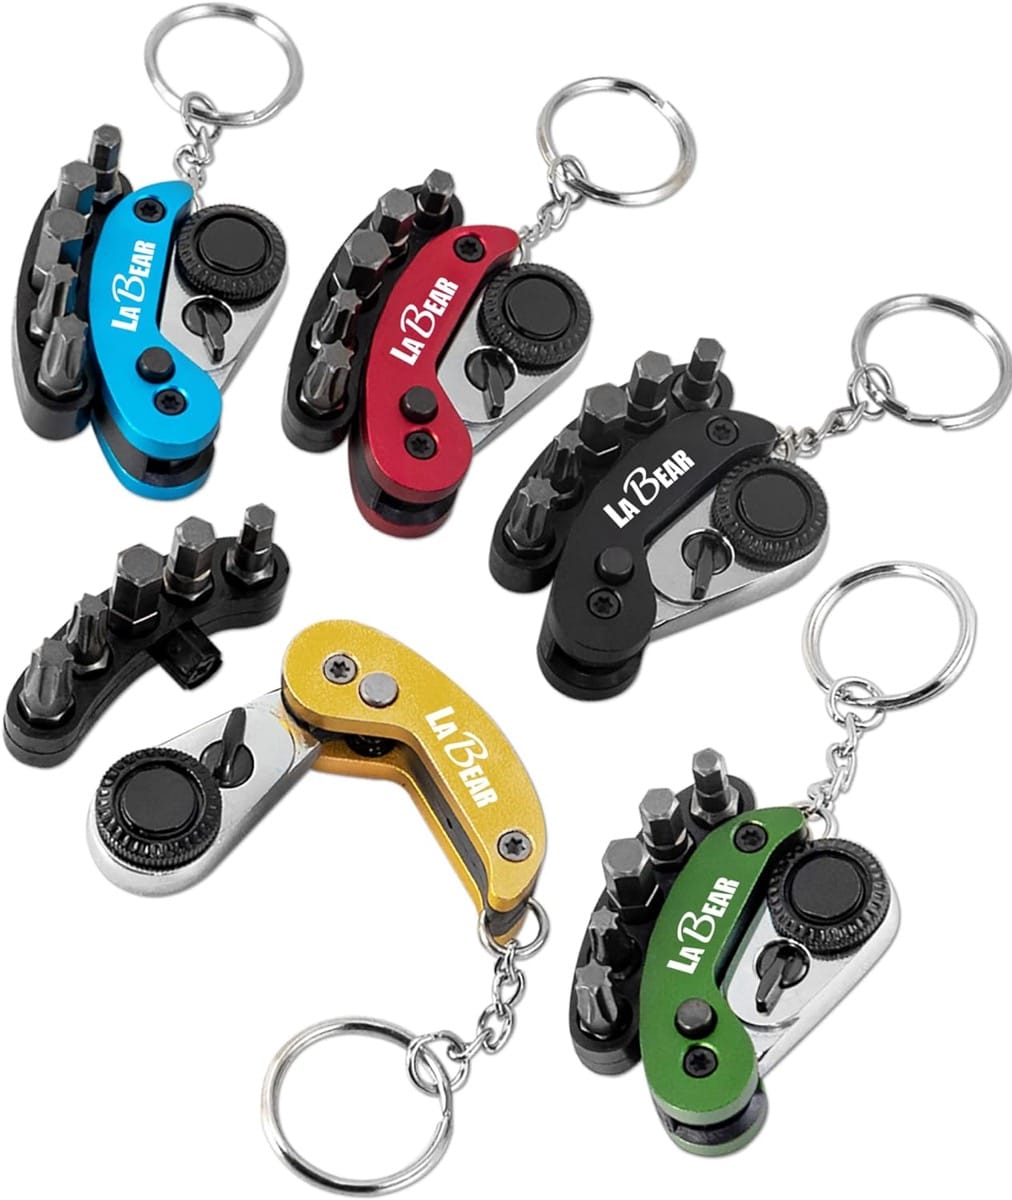 This mini ratchet with bit holder folds up to fit in your pocket or your keychain!